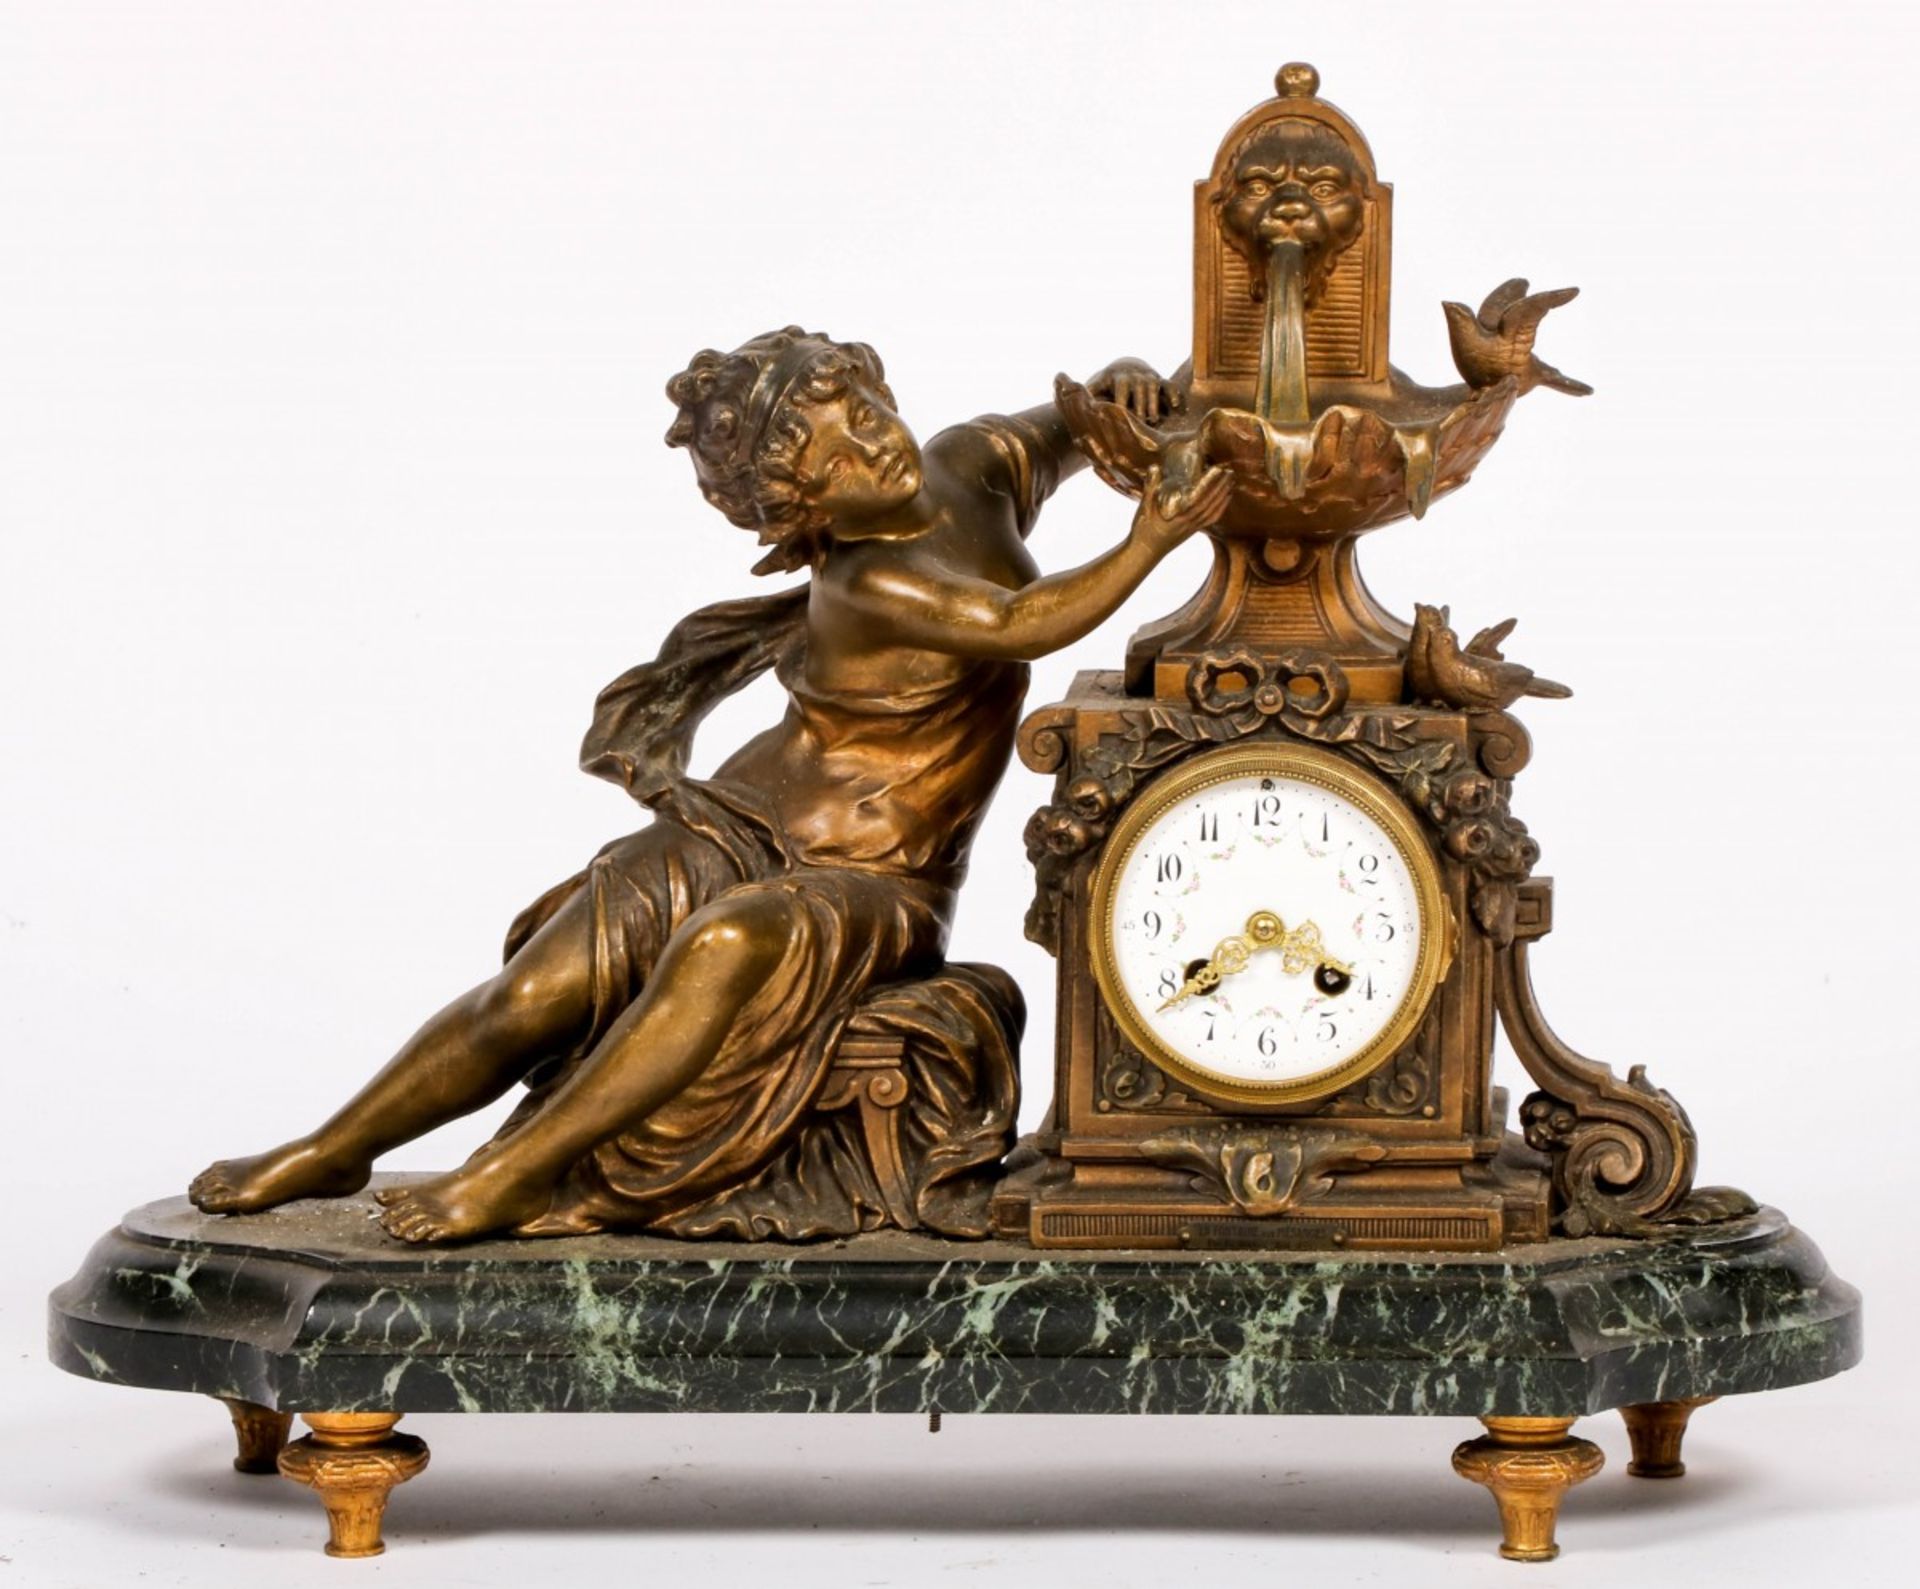 A ZAMAC chimey clock with a girl at a fountain, 20th century.